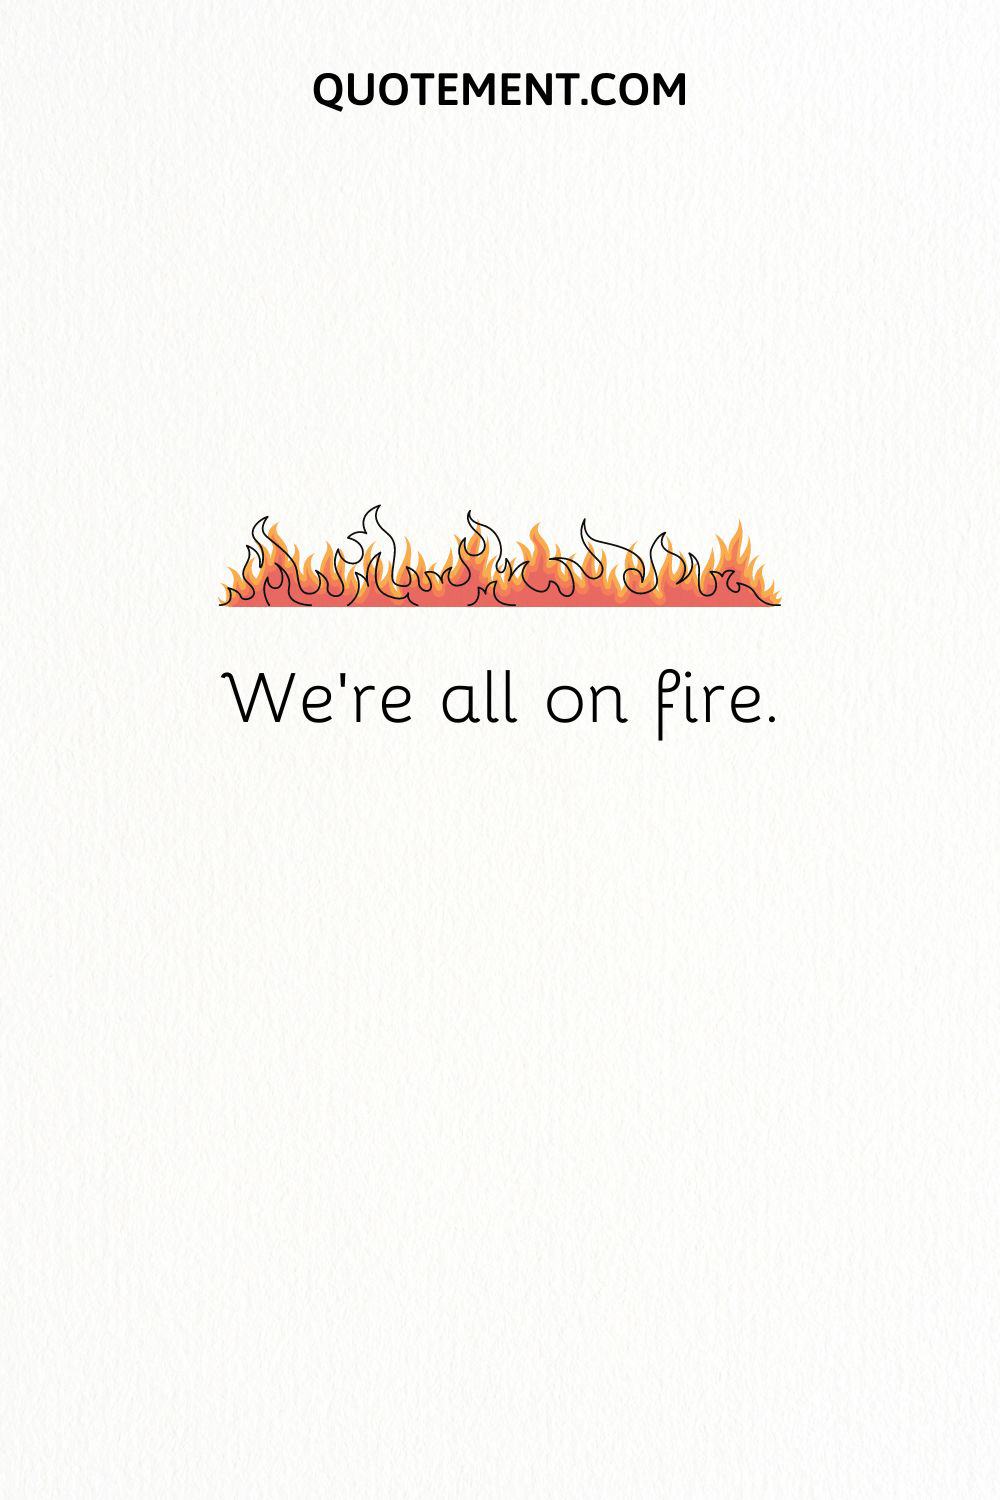 We’re all on fire